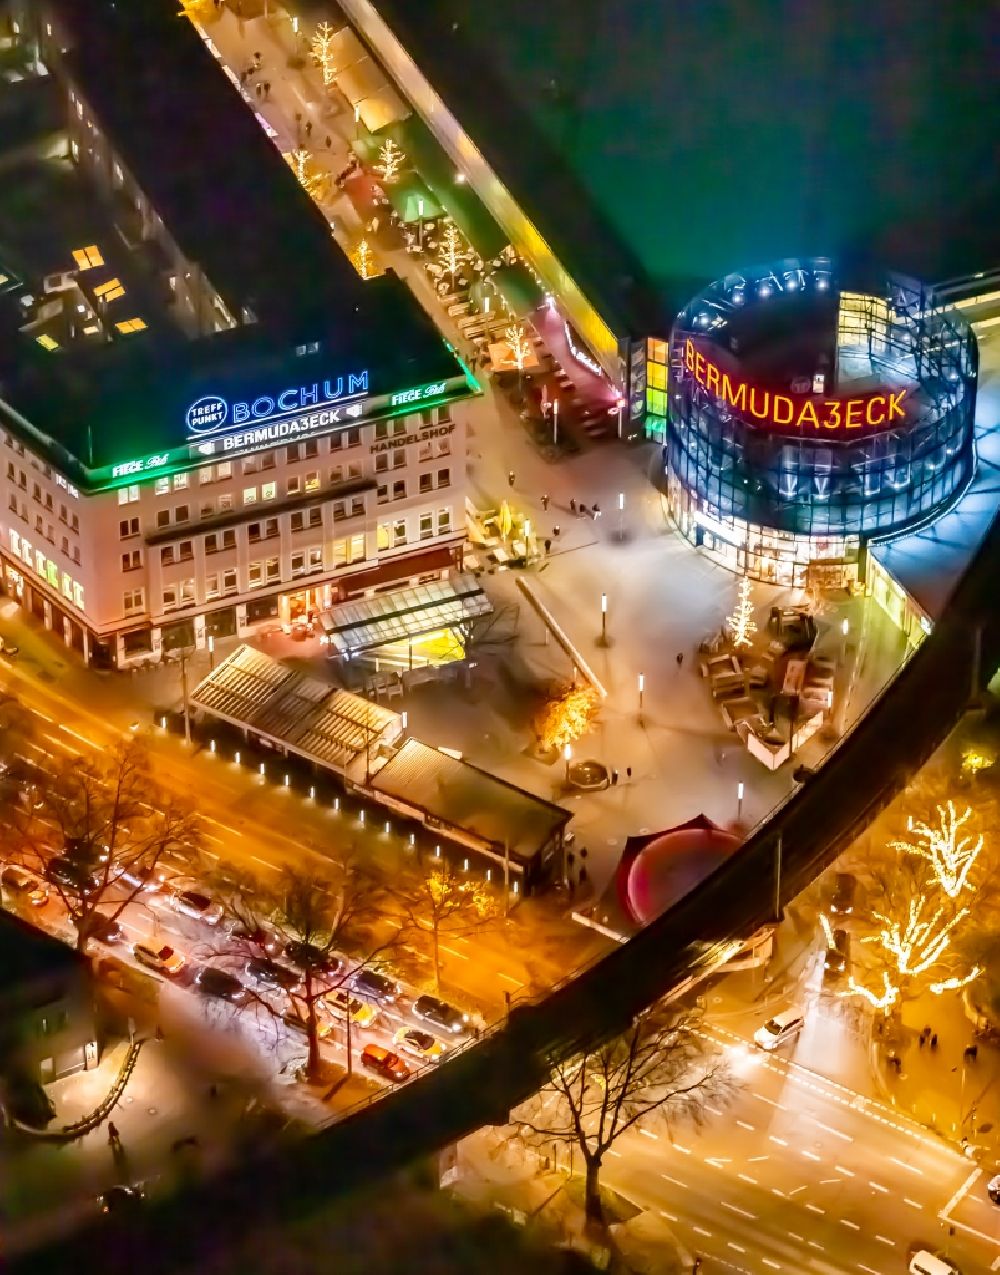 Bochum at night from the bird perspective: Night lighting the grounds of the Bermuda Triangle in Bochum's entertainment district with restaurants and clubs in the city